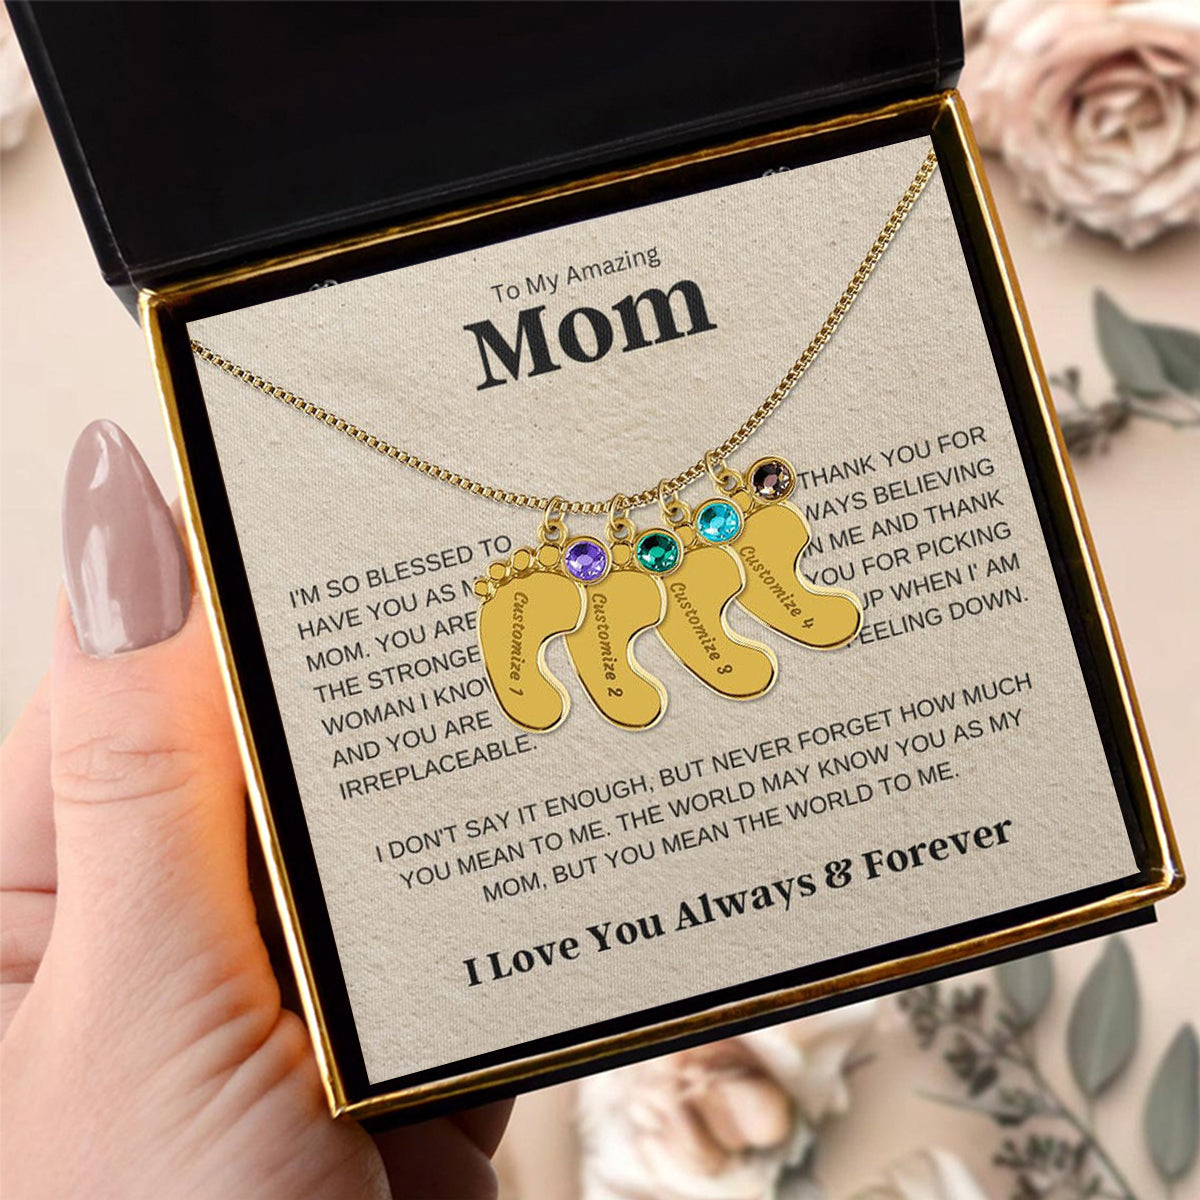 Personalized Baby Feet Necklace with Birthstone For Mom